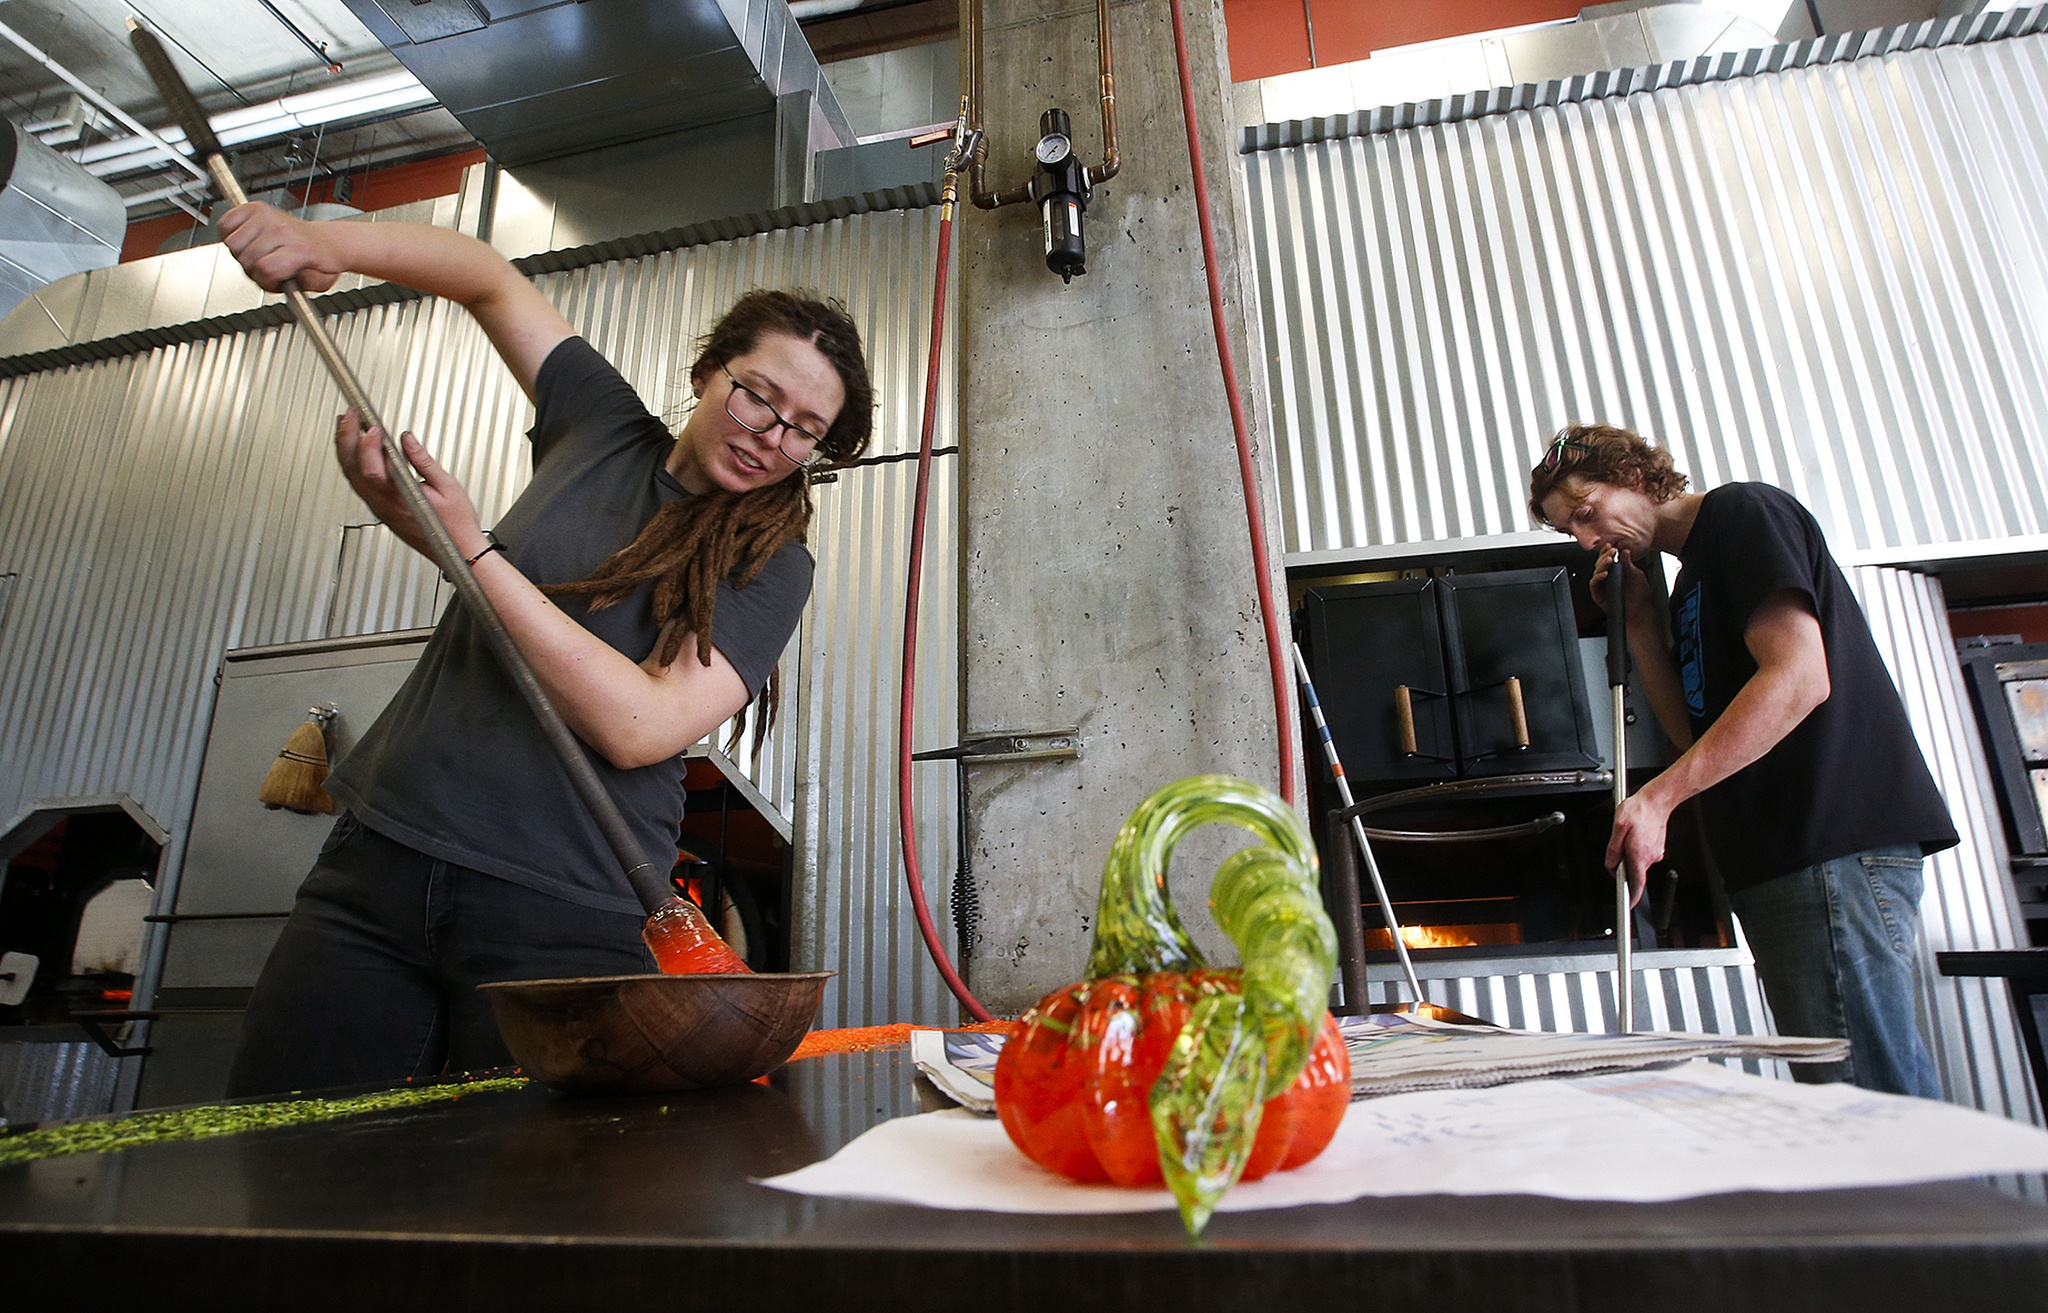 Jo Andersson (left) and Corey Windnagel work to create glass blown pumpkins for Schack-toberfest, the Schack Art Centerճ 6th annual pumpkin festival in downtown Everett from September 15-25, 2016. Andersson estimates over 700 handmade pumpkins will be on display during the exhibit. (Ian Terry / The Herald)